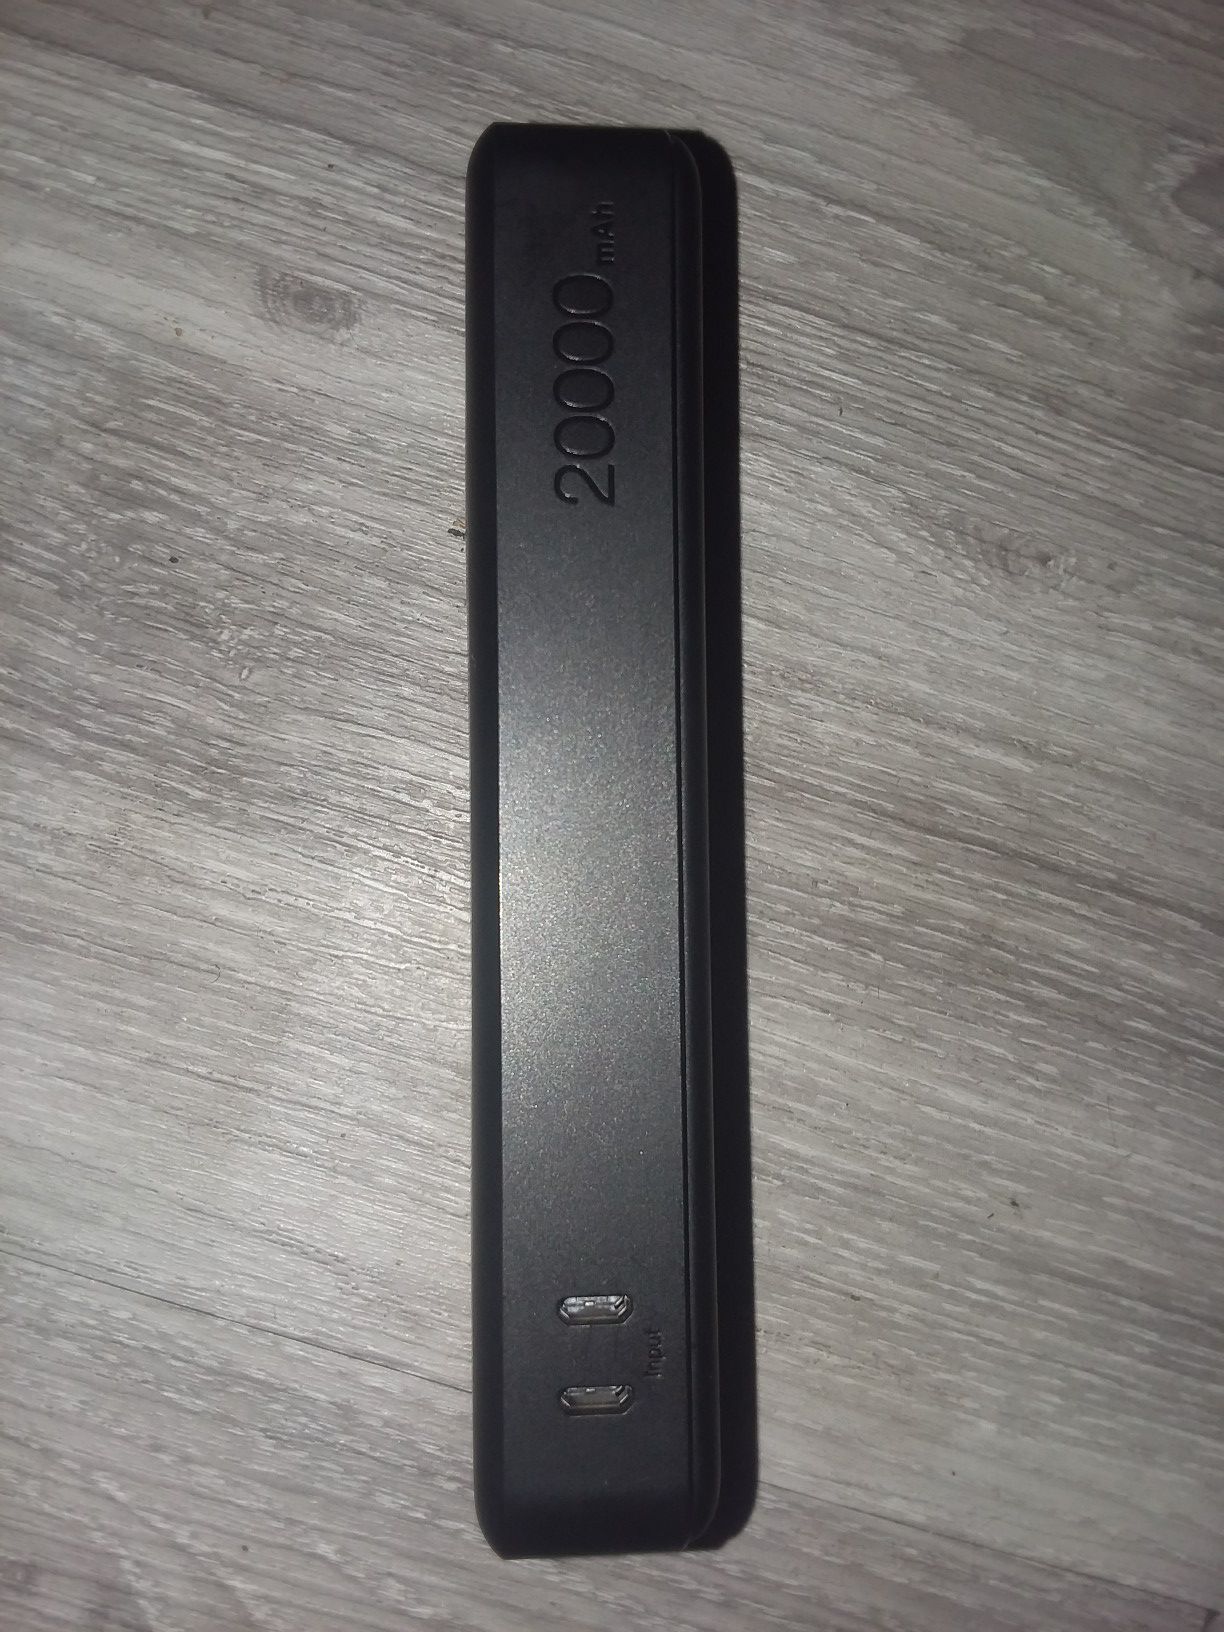 Anker PowerCore Elite 20000 Charger for Sale in Phoenix, AZ - OfferUp